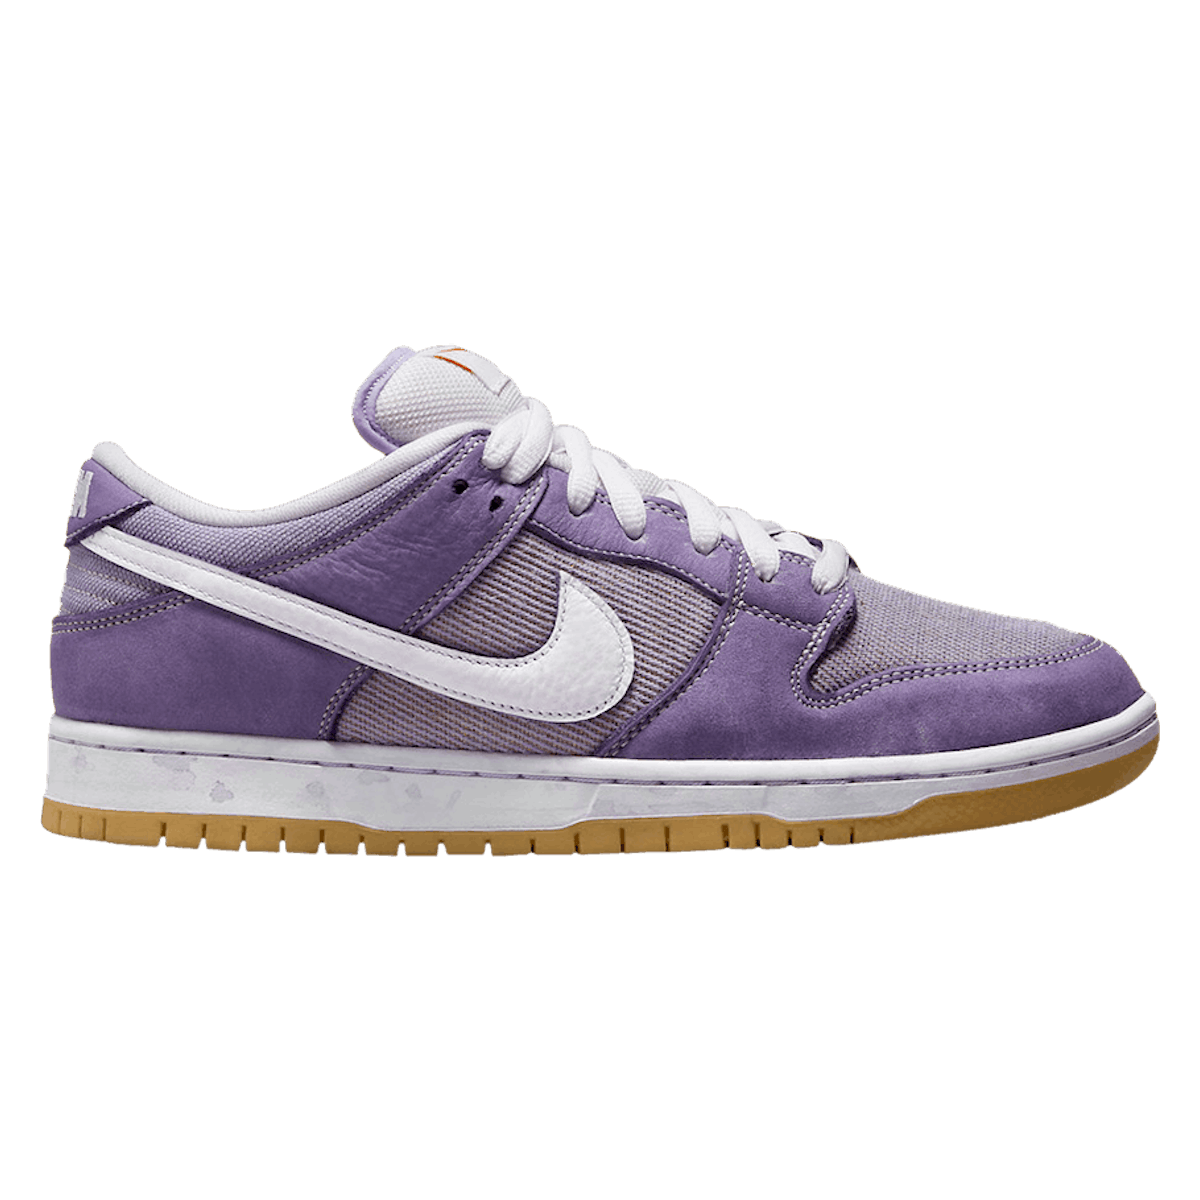 Nike Dunk Low SB "Unbleached Pack - Lilac"